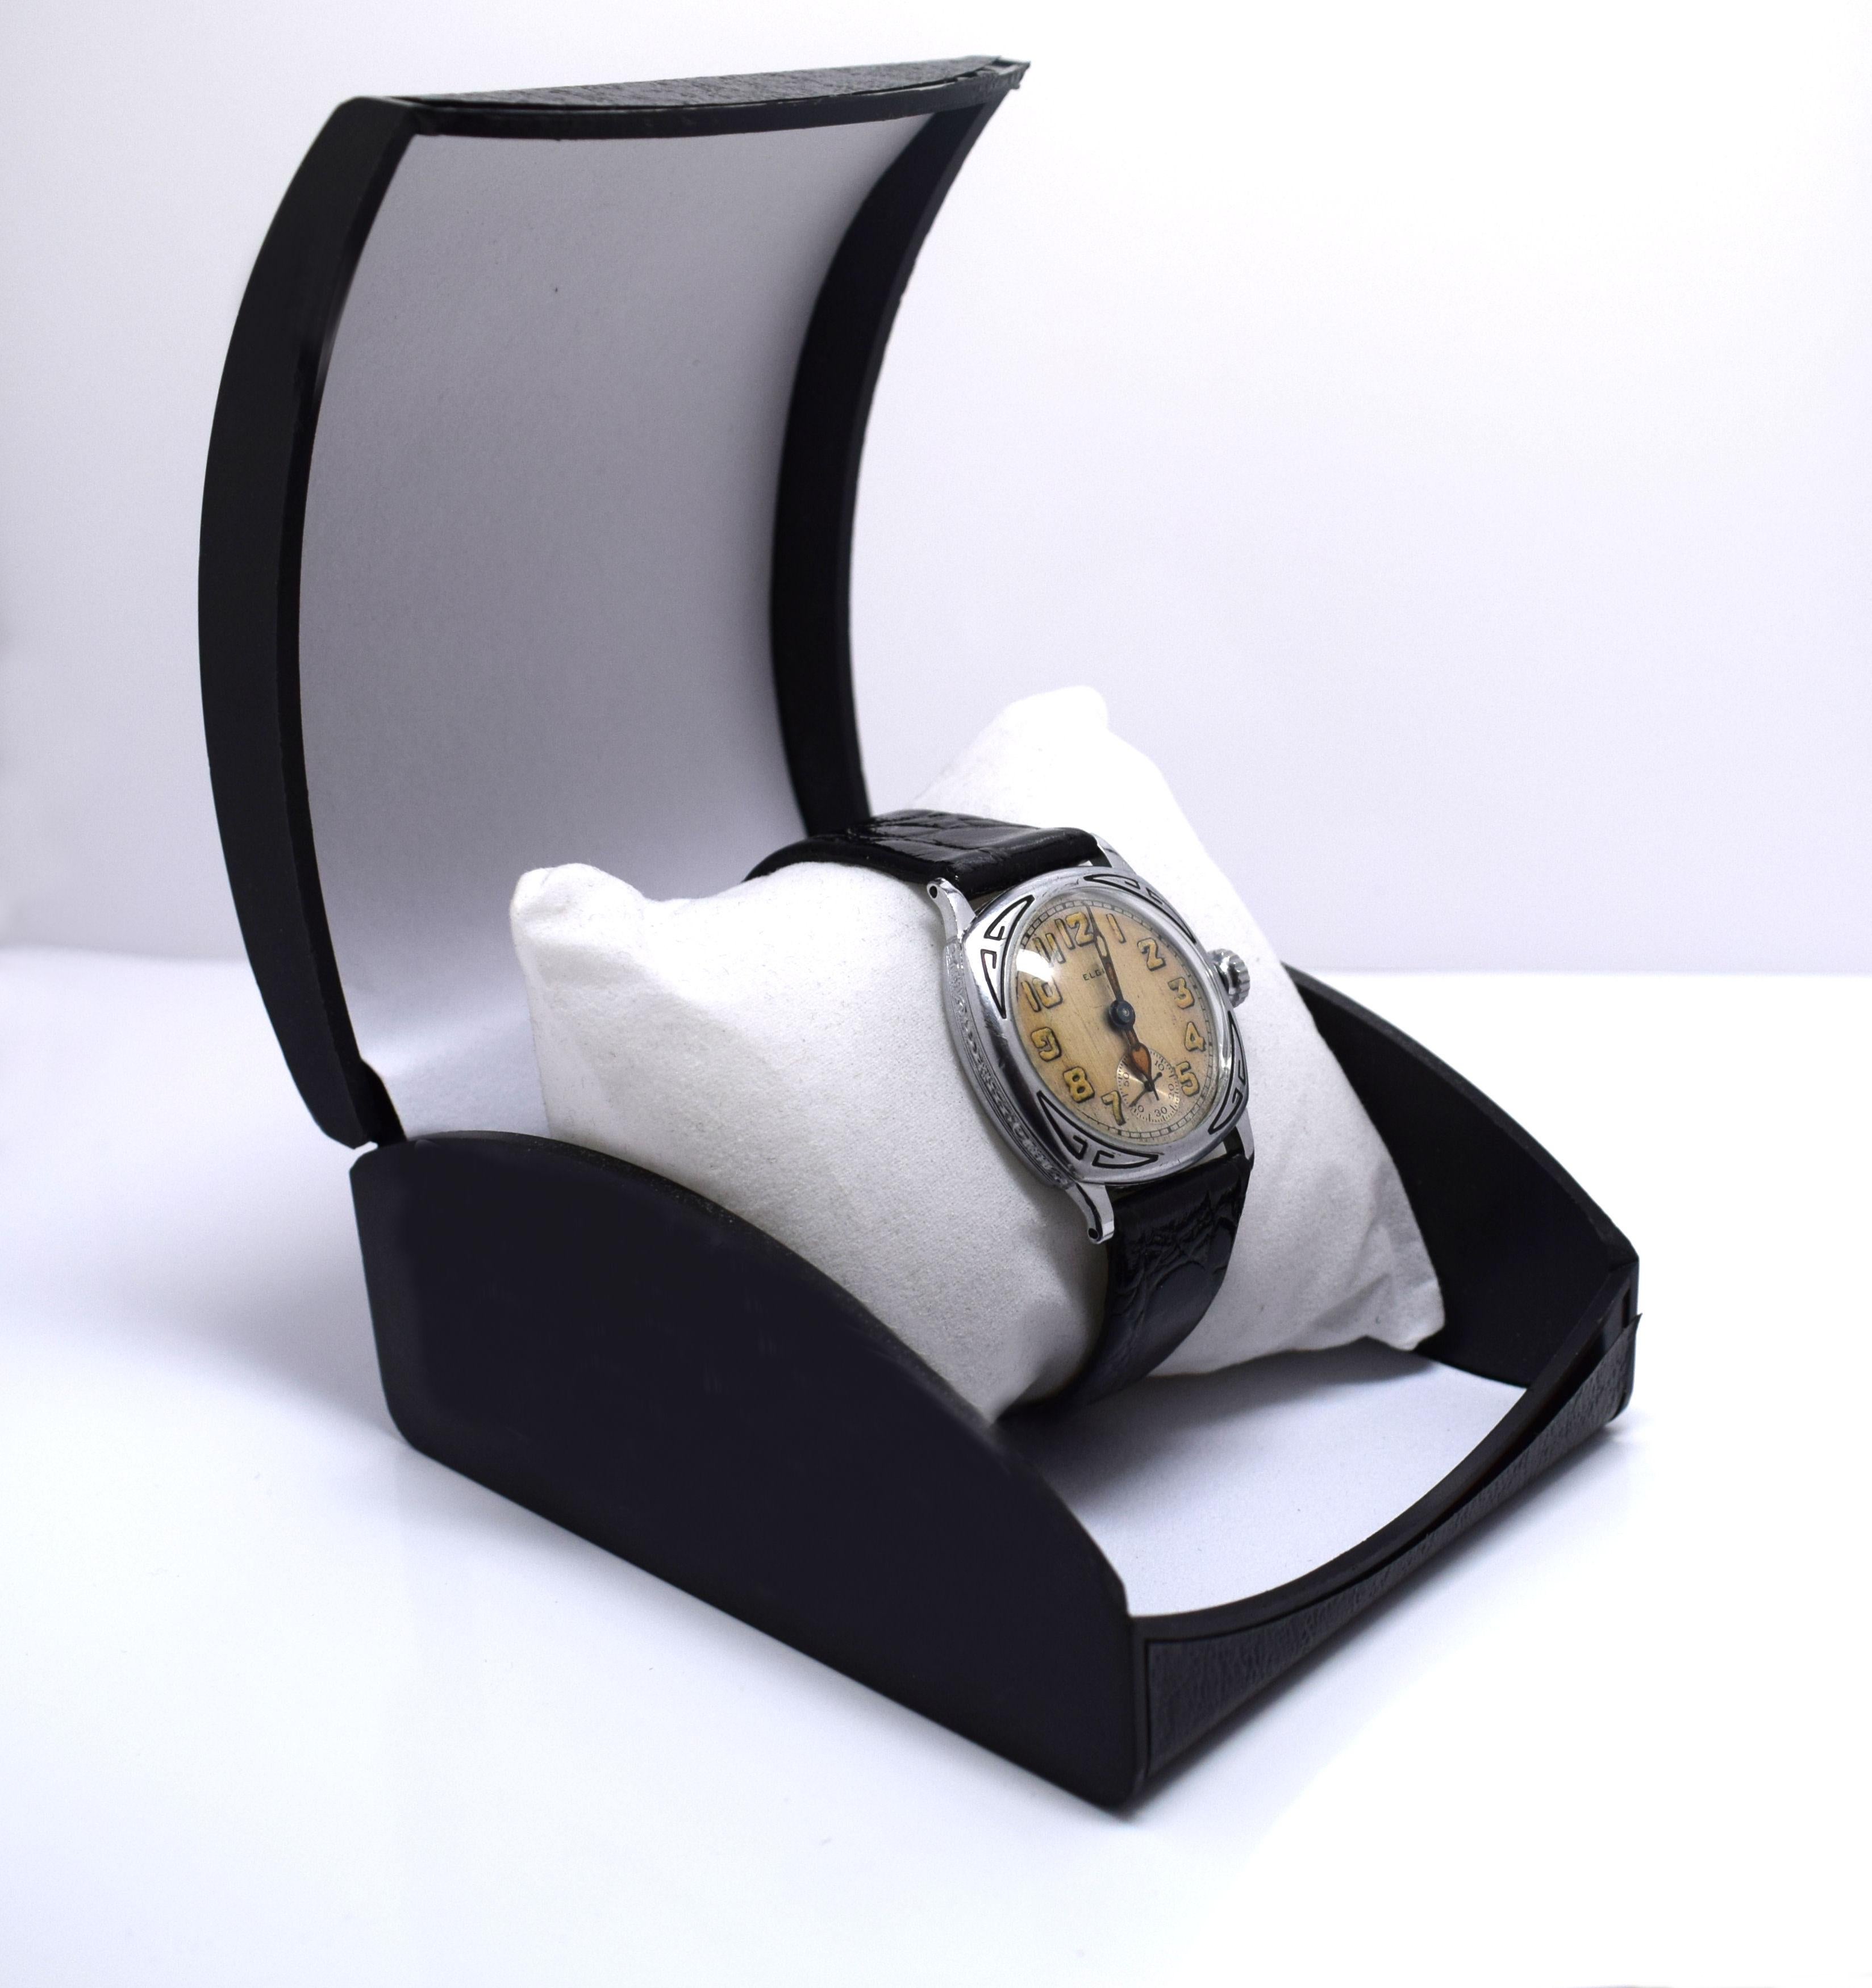 Stunning Art Deco White Gold Filled Gents Wristwatch by Elgin 3